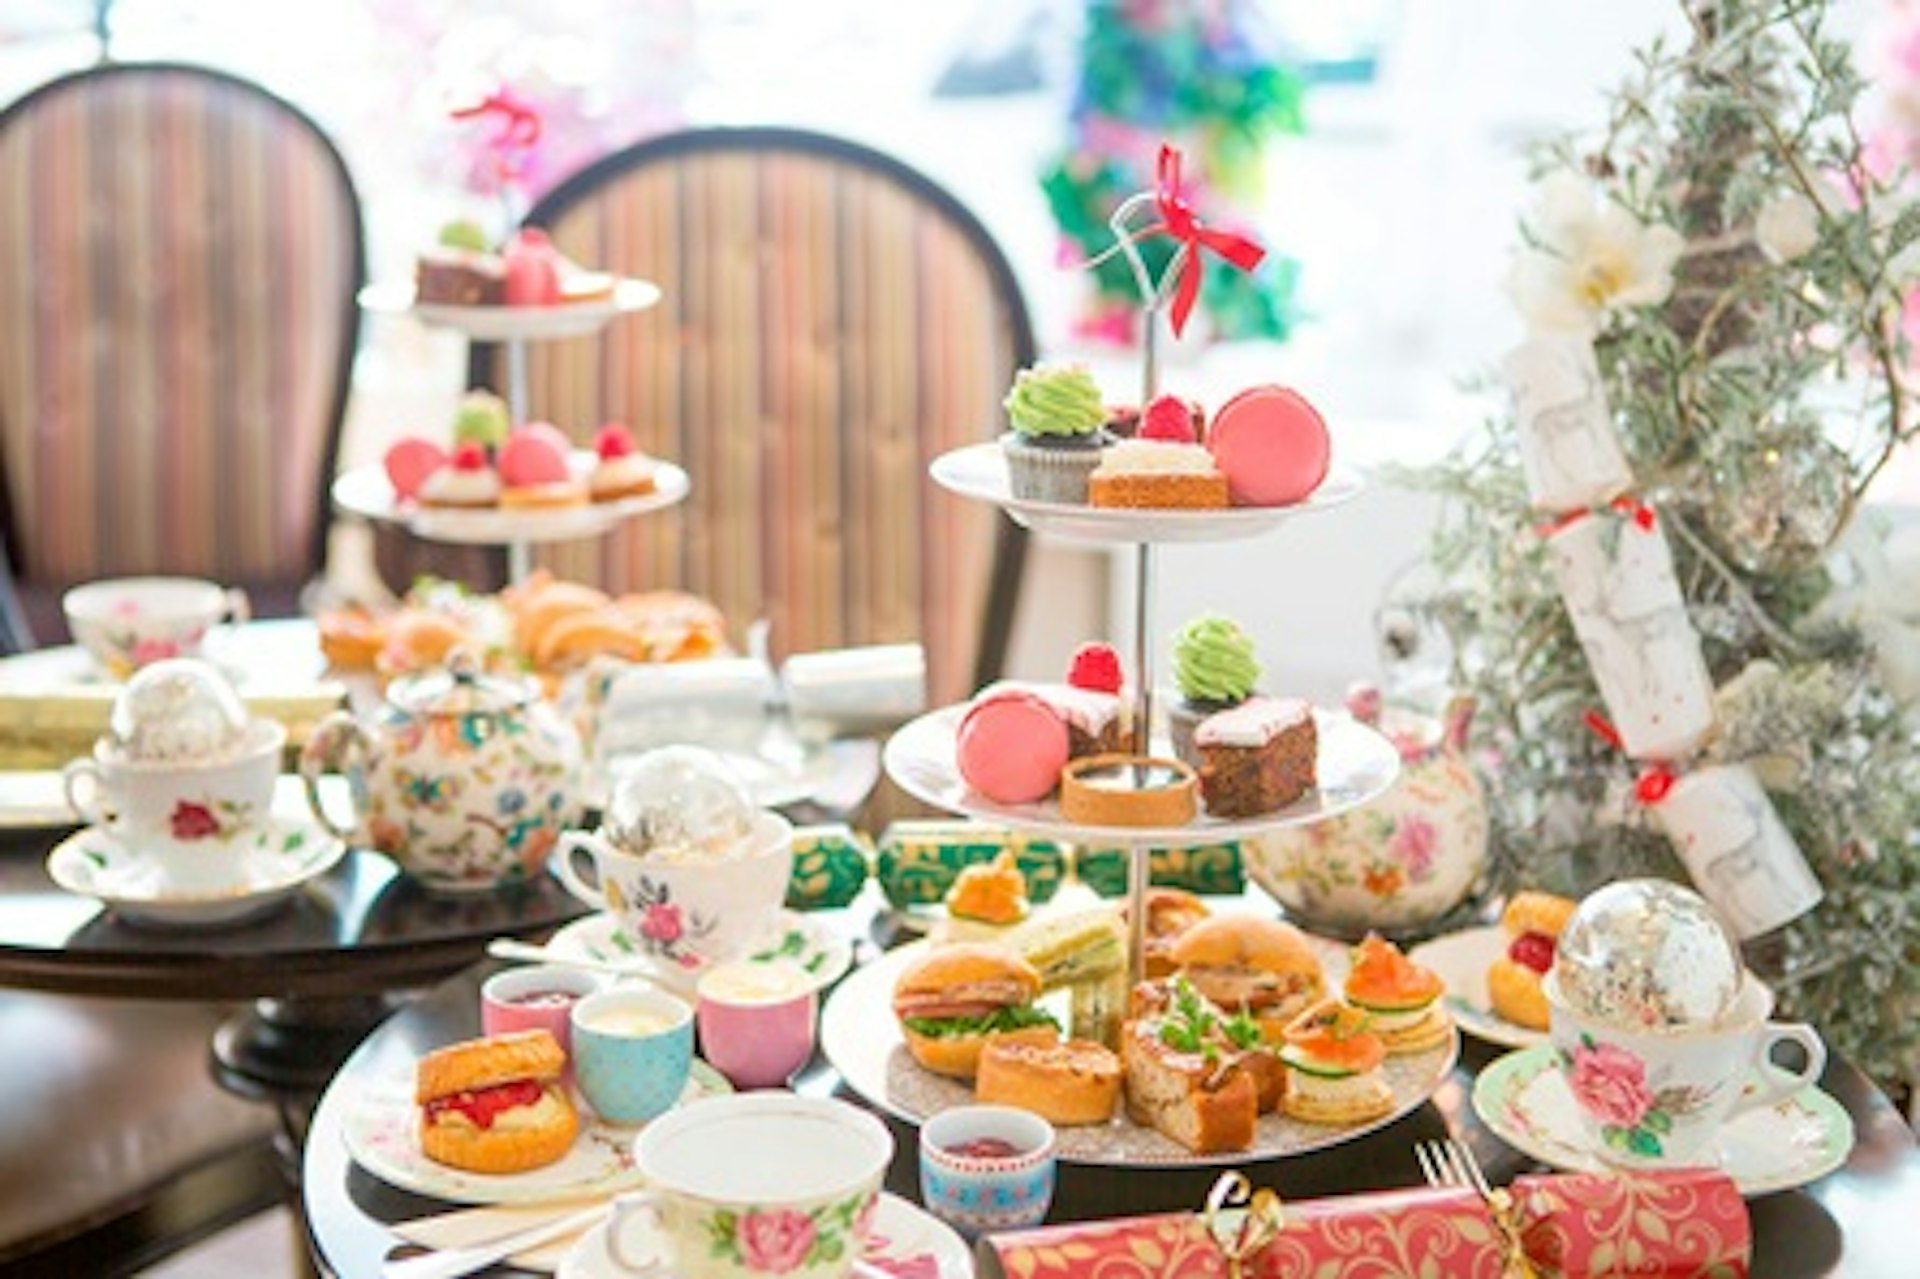 Bottomless Prosecco Afternoon Tea for Two at Brigit's Bakery Covent Garden 1